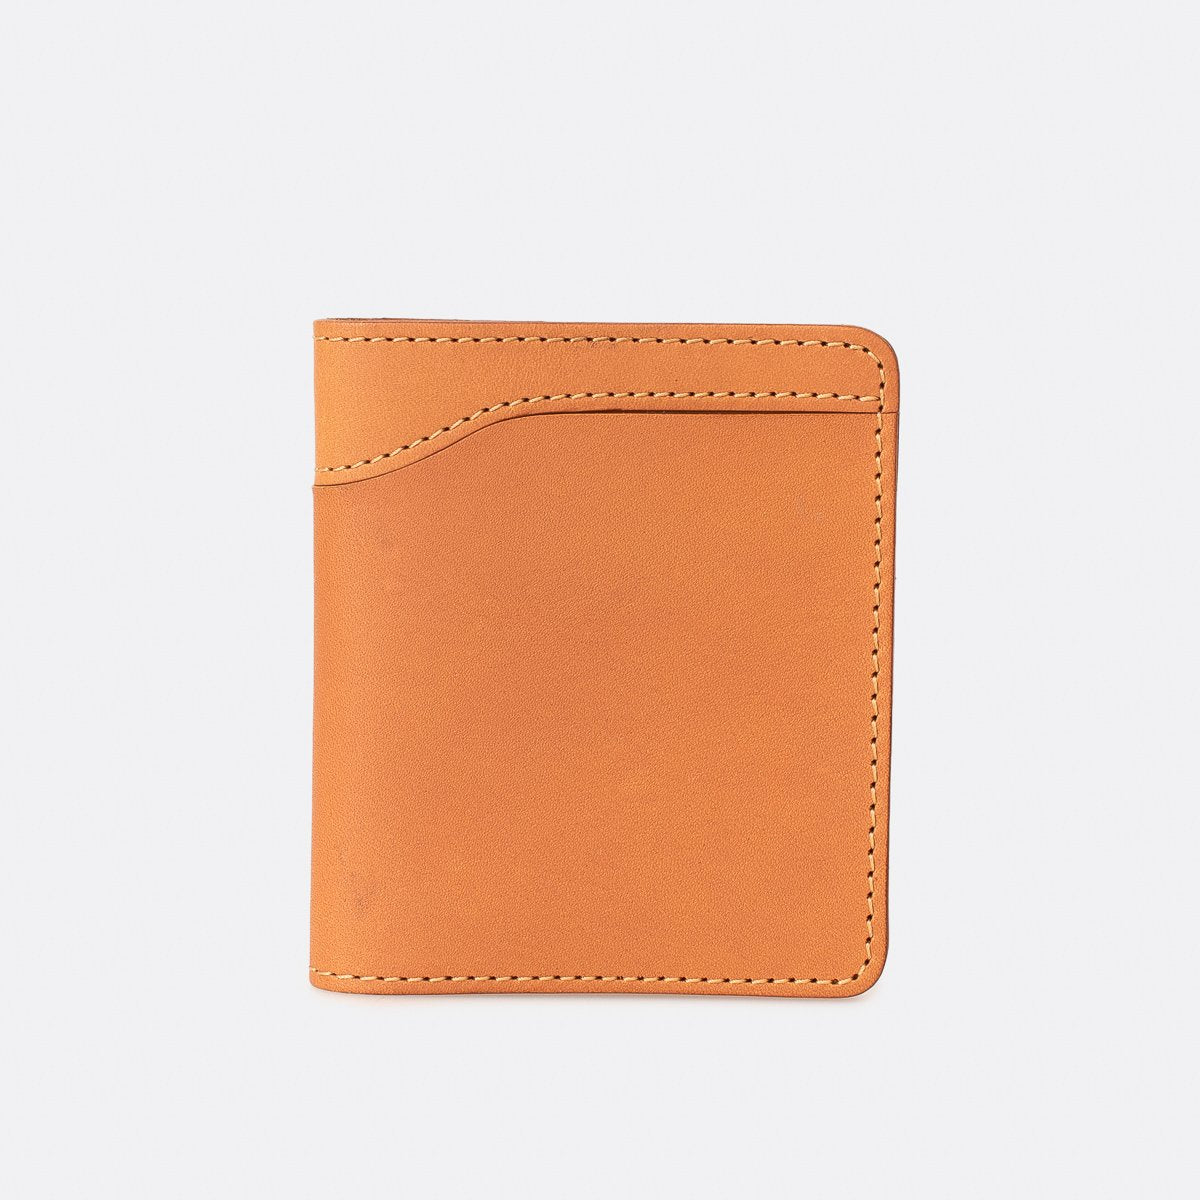 Obbi Good Label Condor Bifold Wallet with Outer Bill Slot - Tan